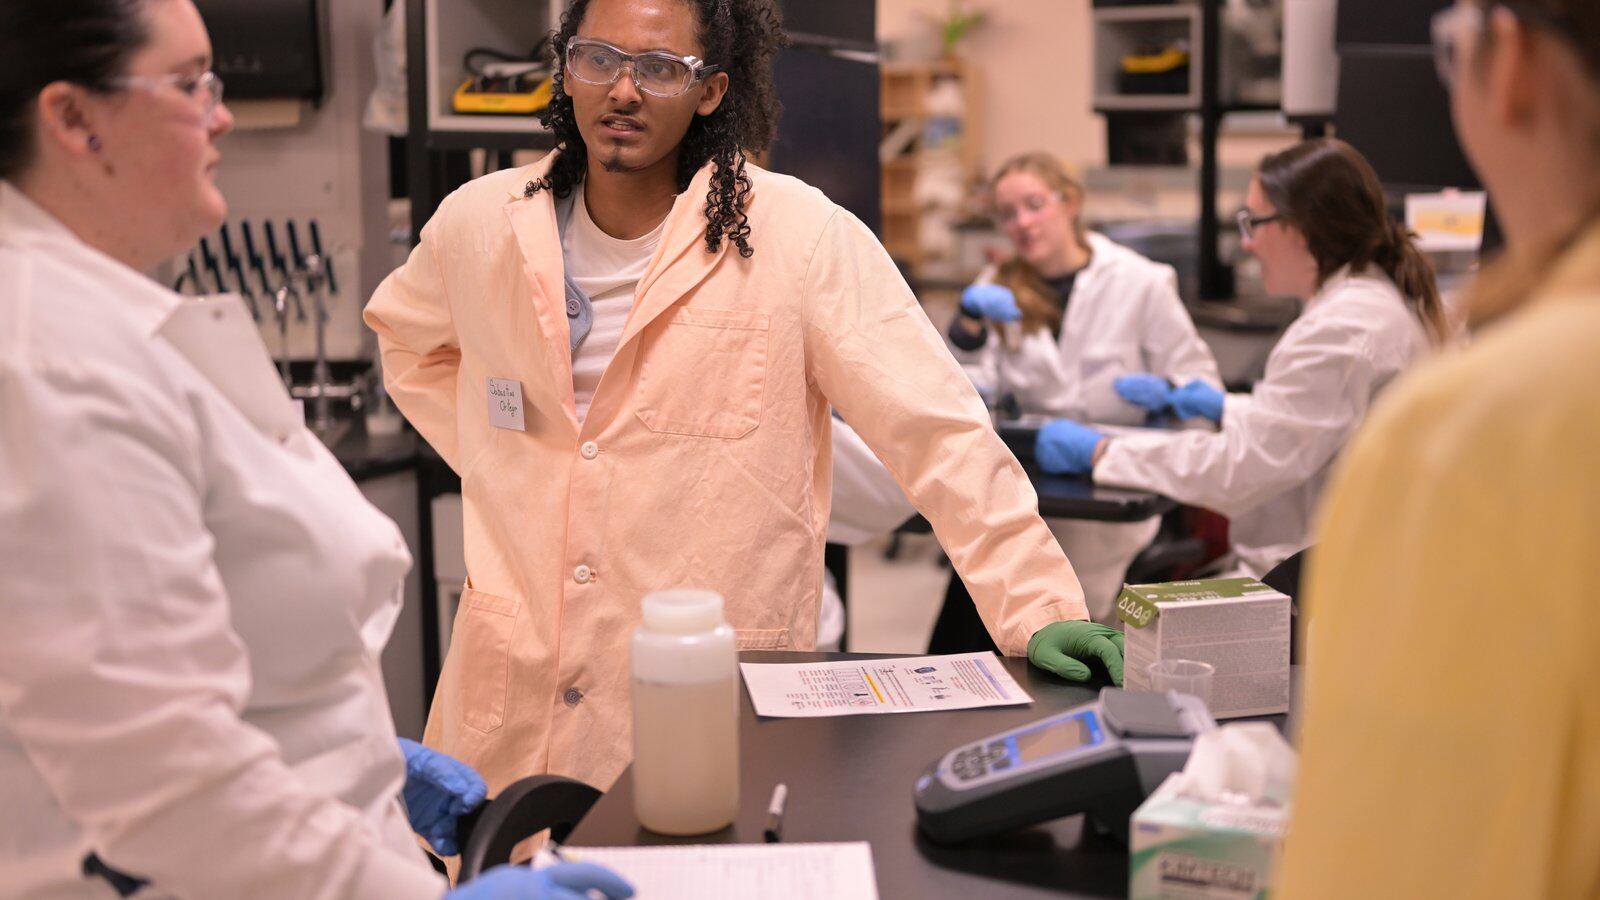 Students wearing lab coats and safety equipment work in a college laboratory.